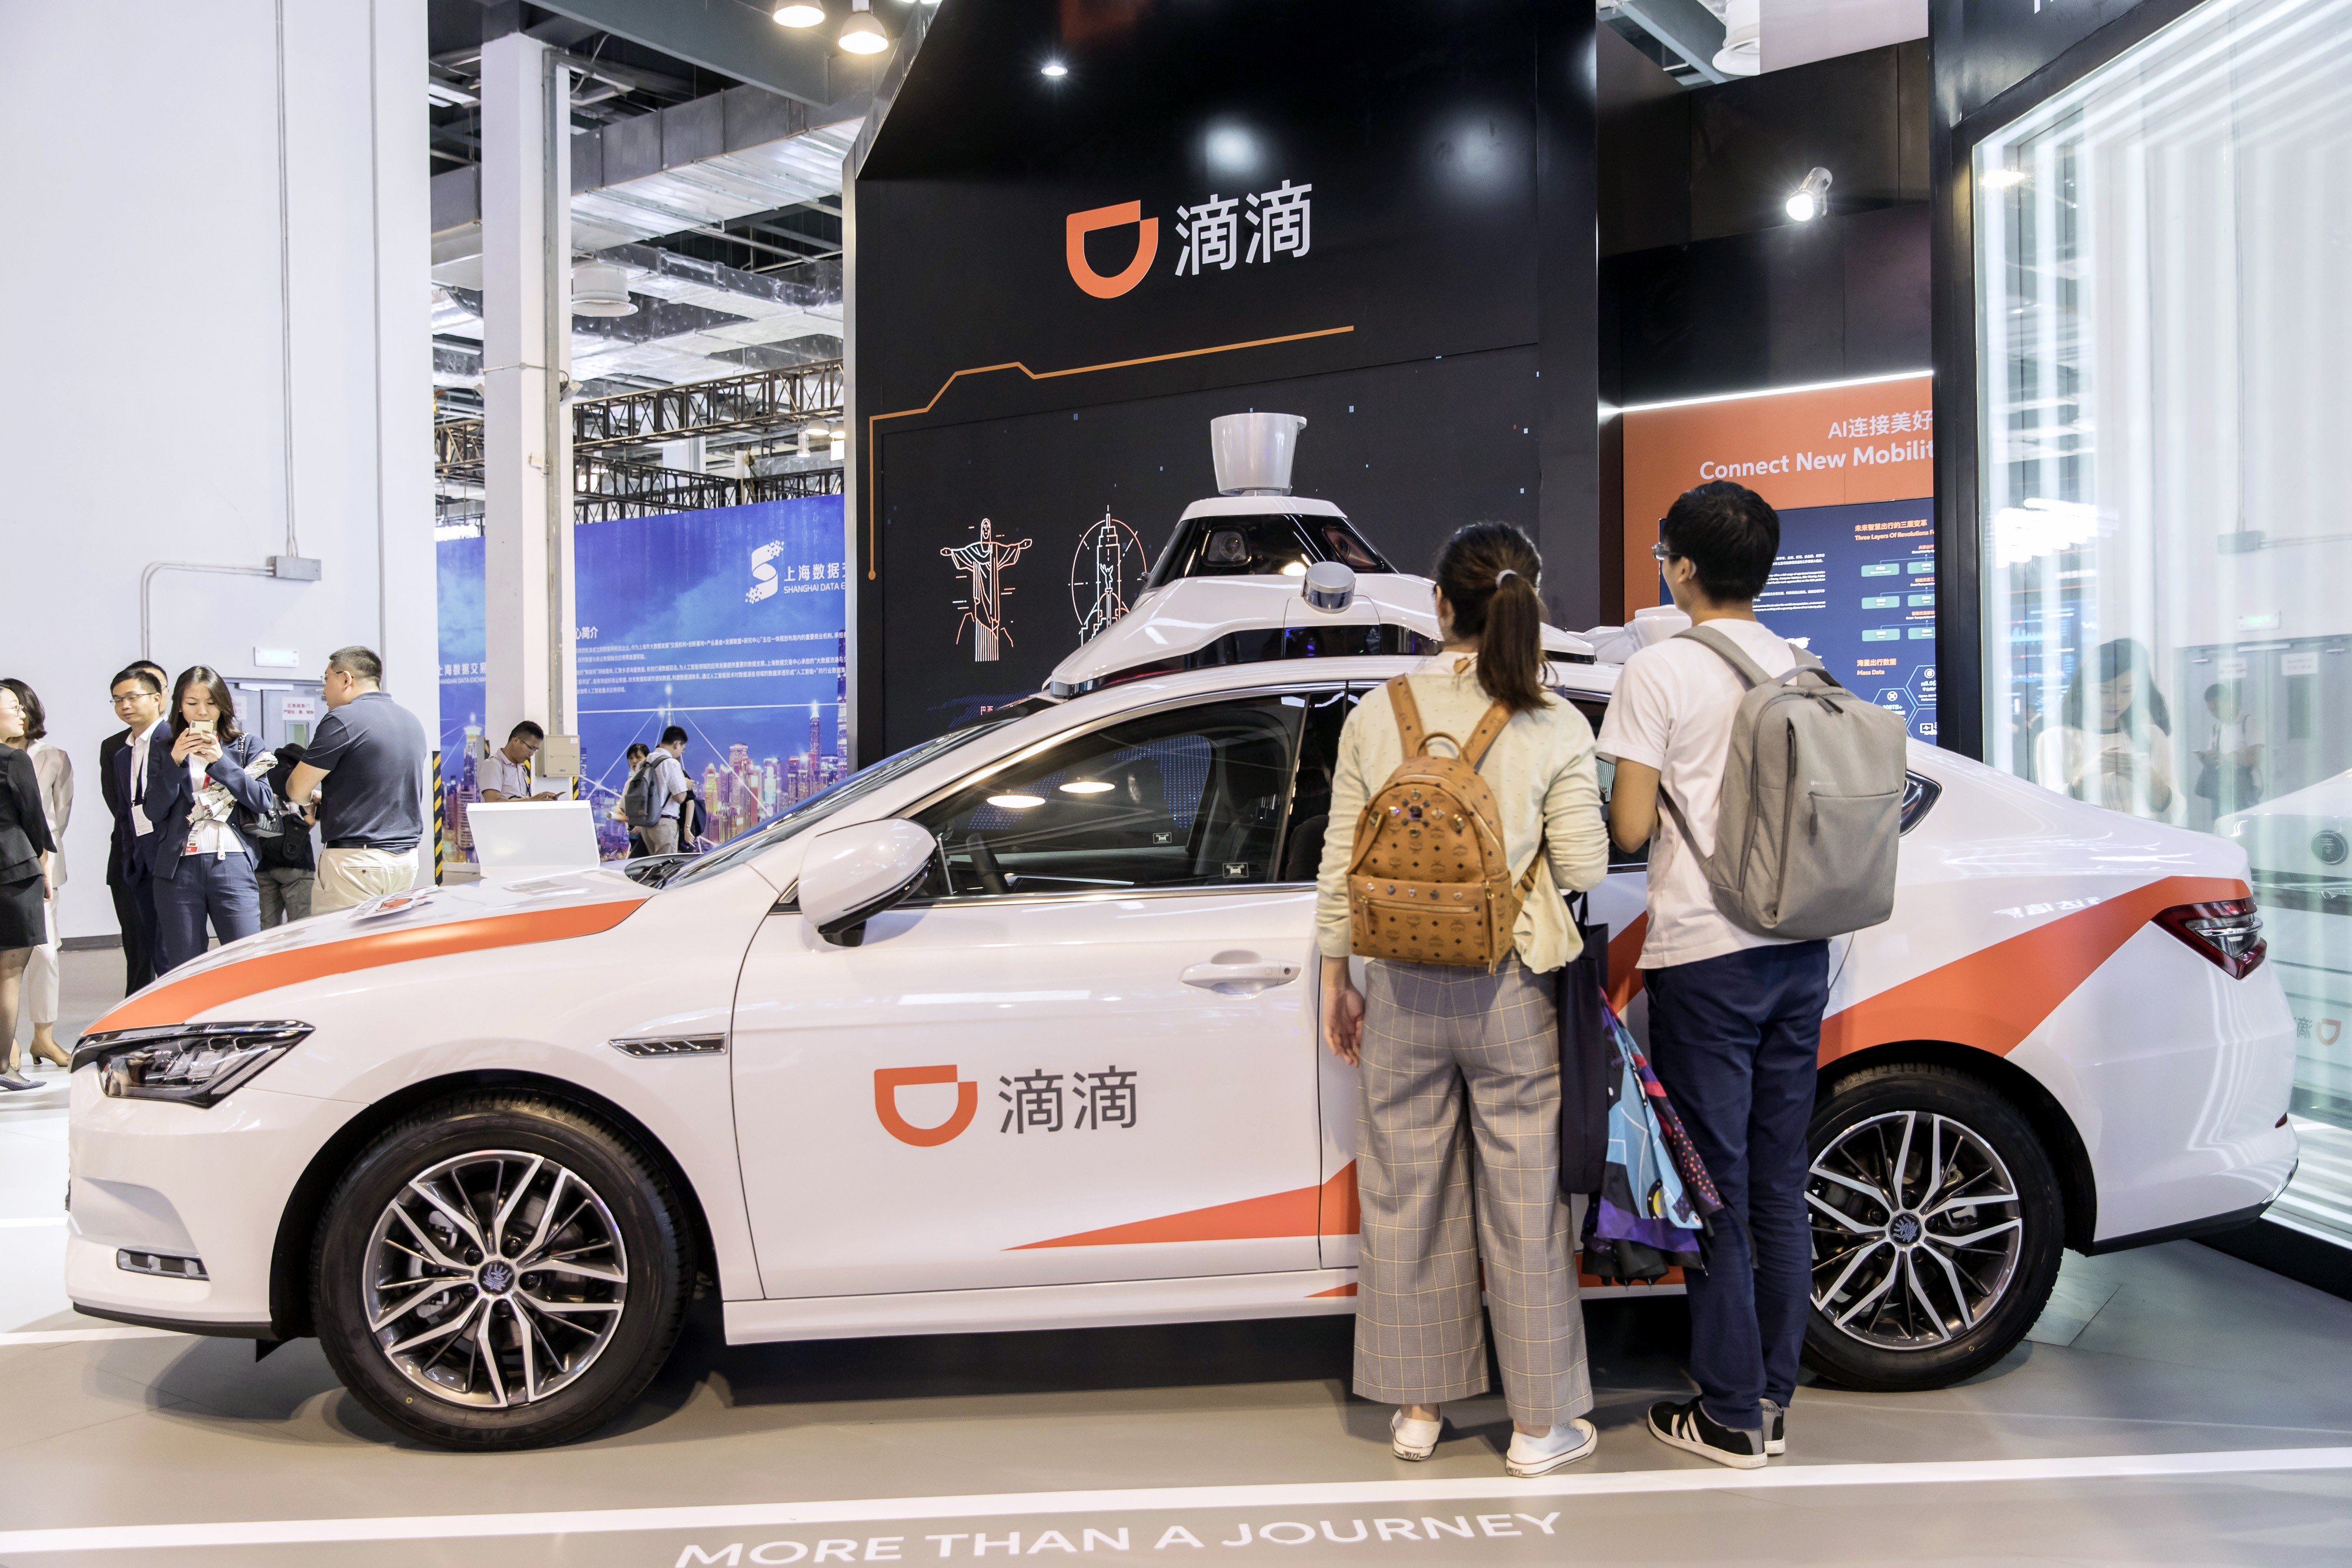 Attendees look at a DiDi Chuxing autonomous vehicle at the World Artificial Intelligence Conference (WAIC) in Shanghai, China, on Thursday, Aug. 29, 2019. Photo: Bloomberg